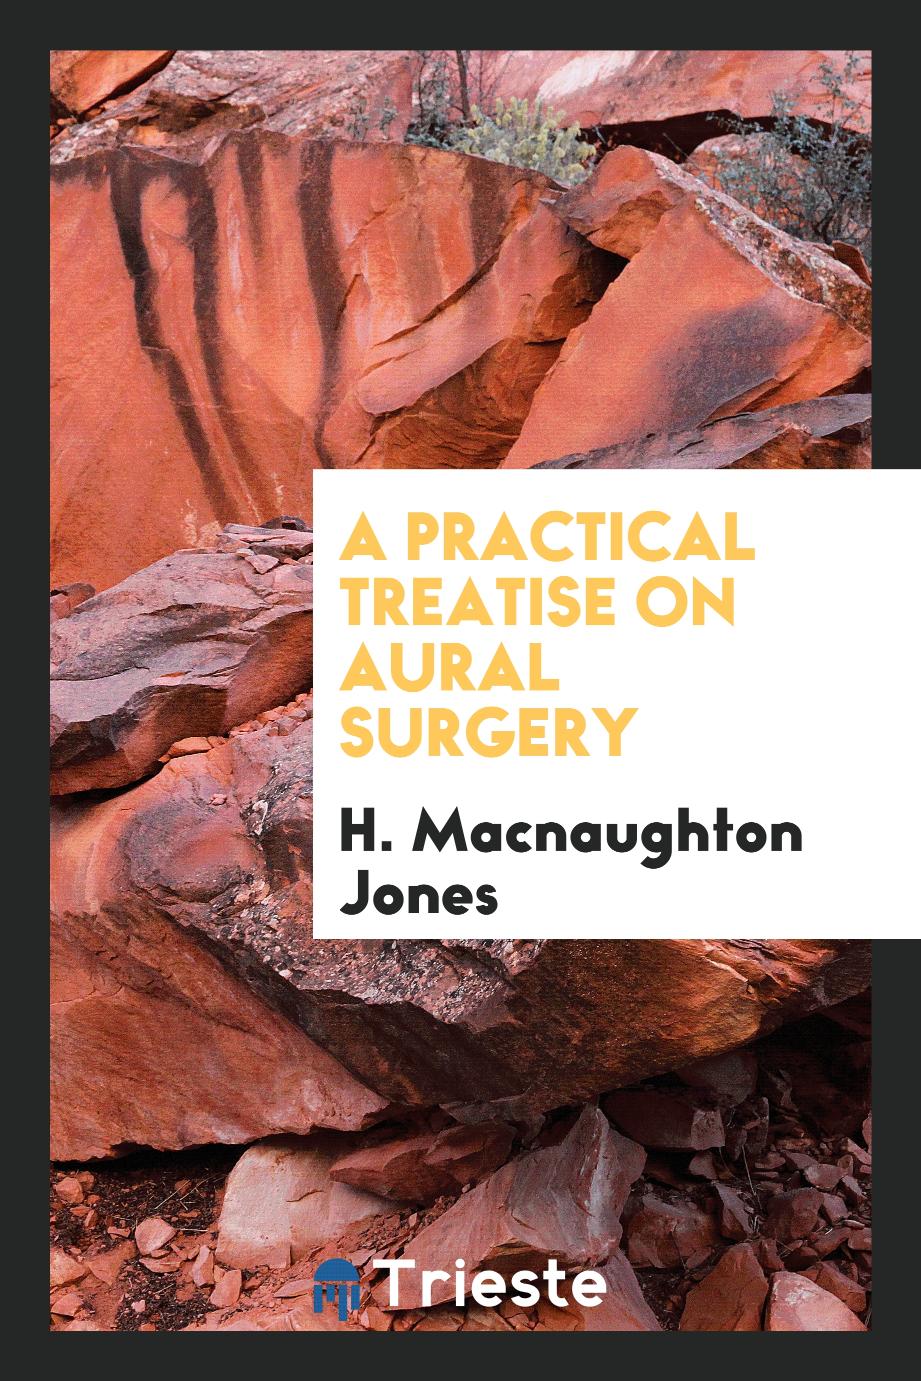 A Practical Treatise on Aural Surgery